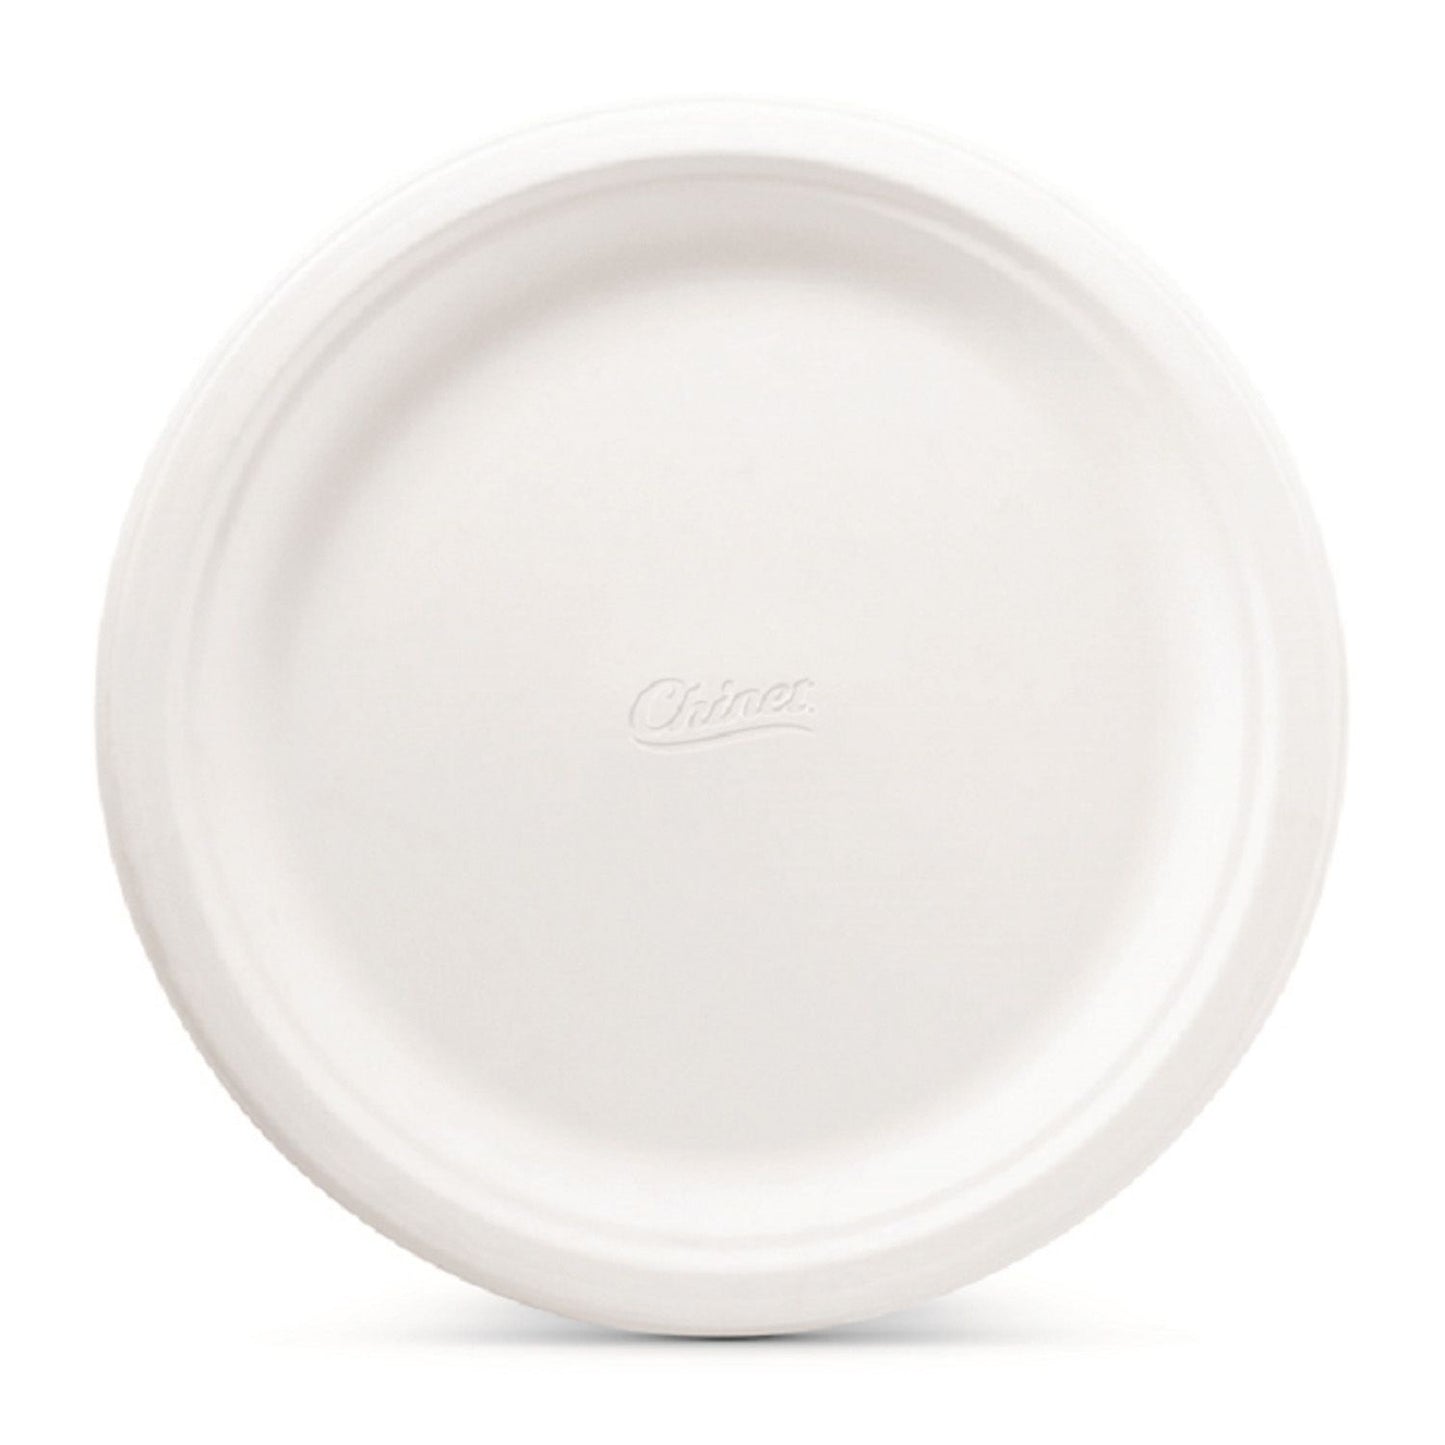 Chinet Classic White 10-3/8" Dinner Plates (165 ct.)